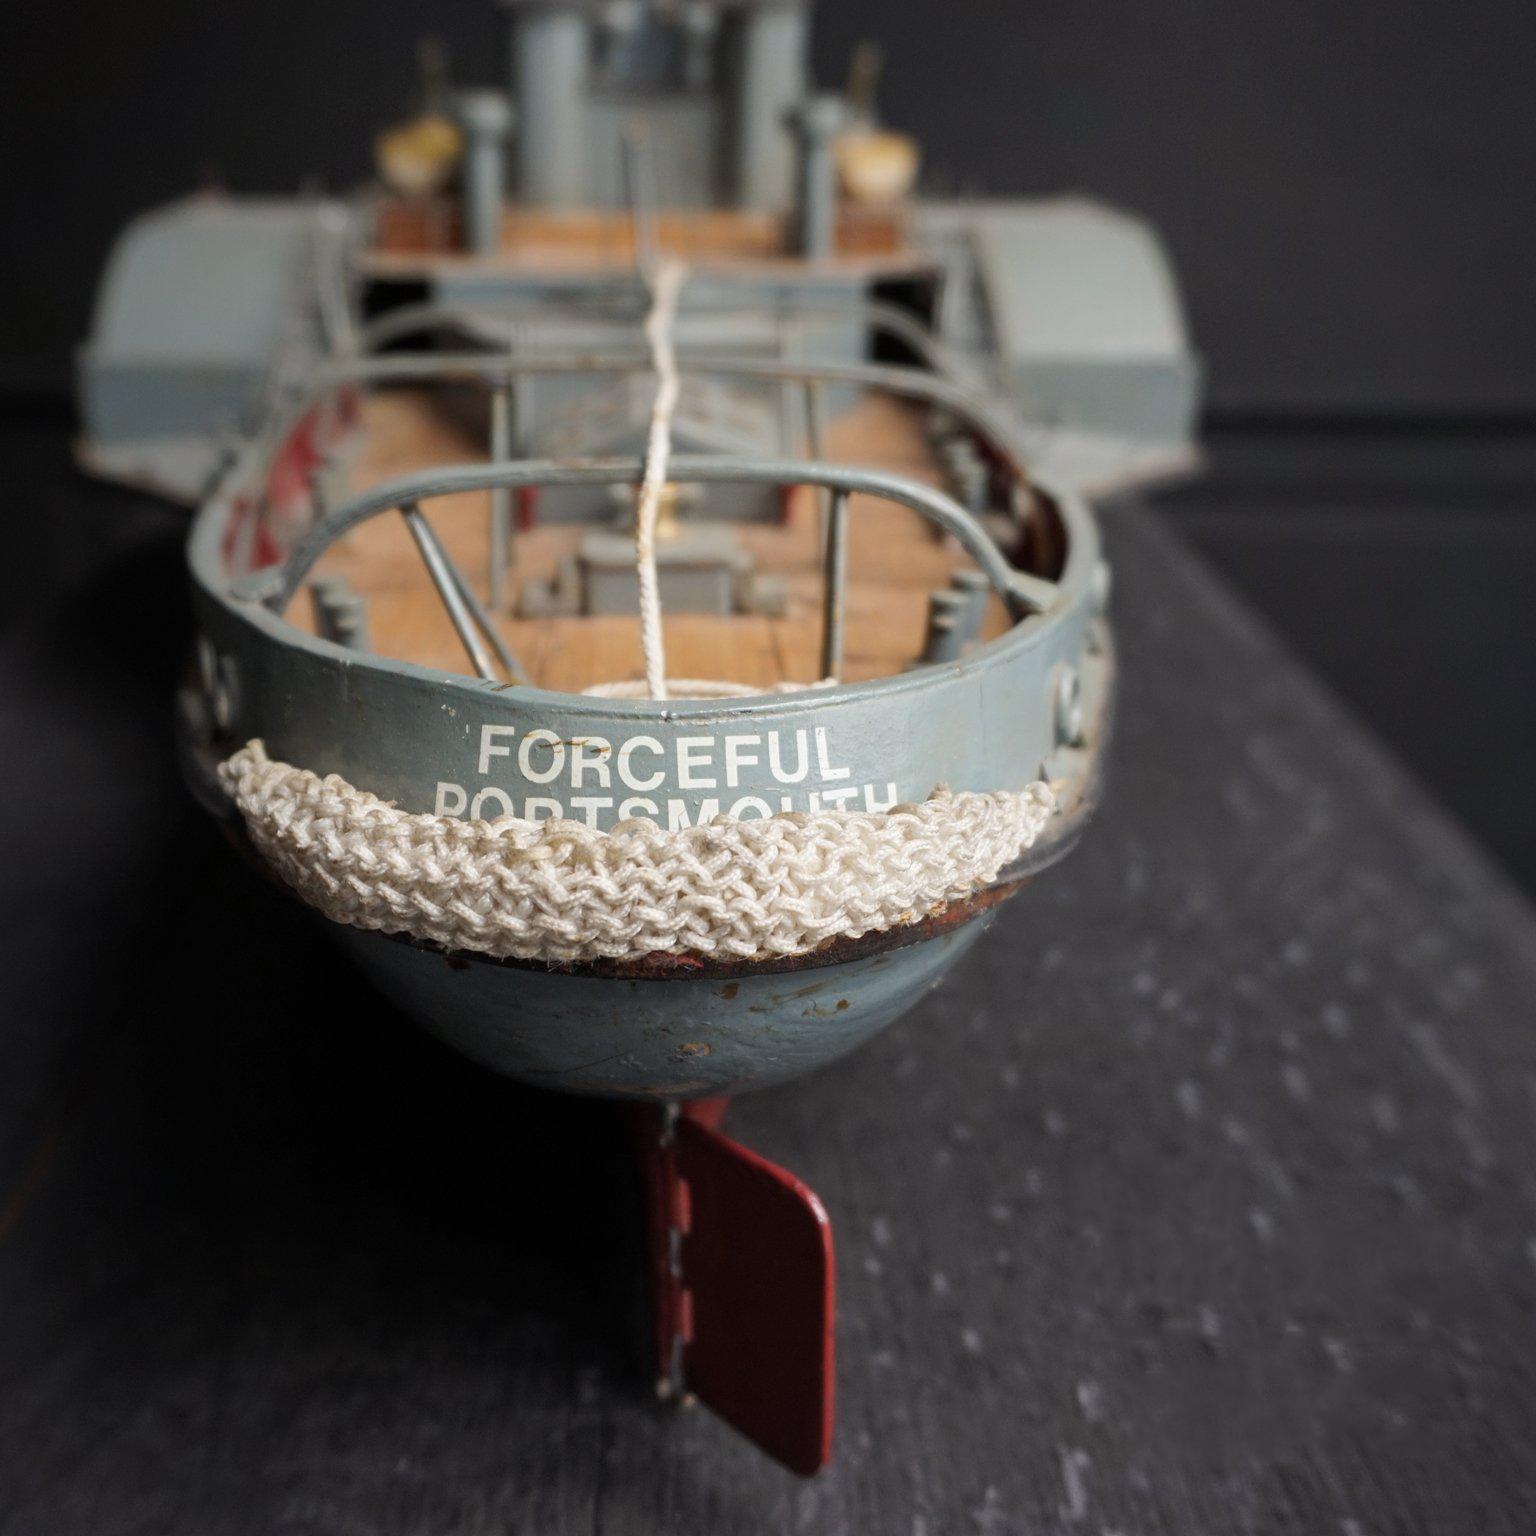 1960s English Wooden Model of the 'Forceful in Portsmouth' Paddle Wheel Boat 1